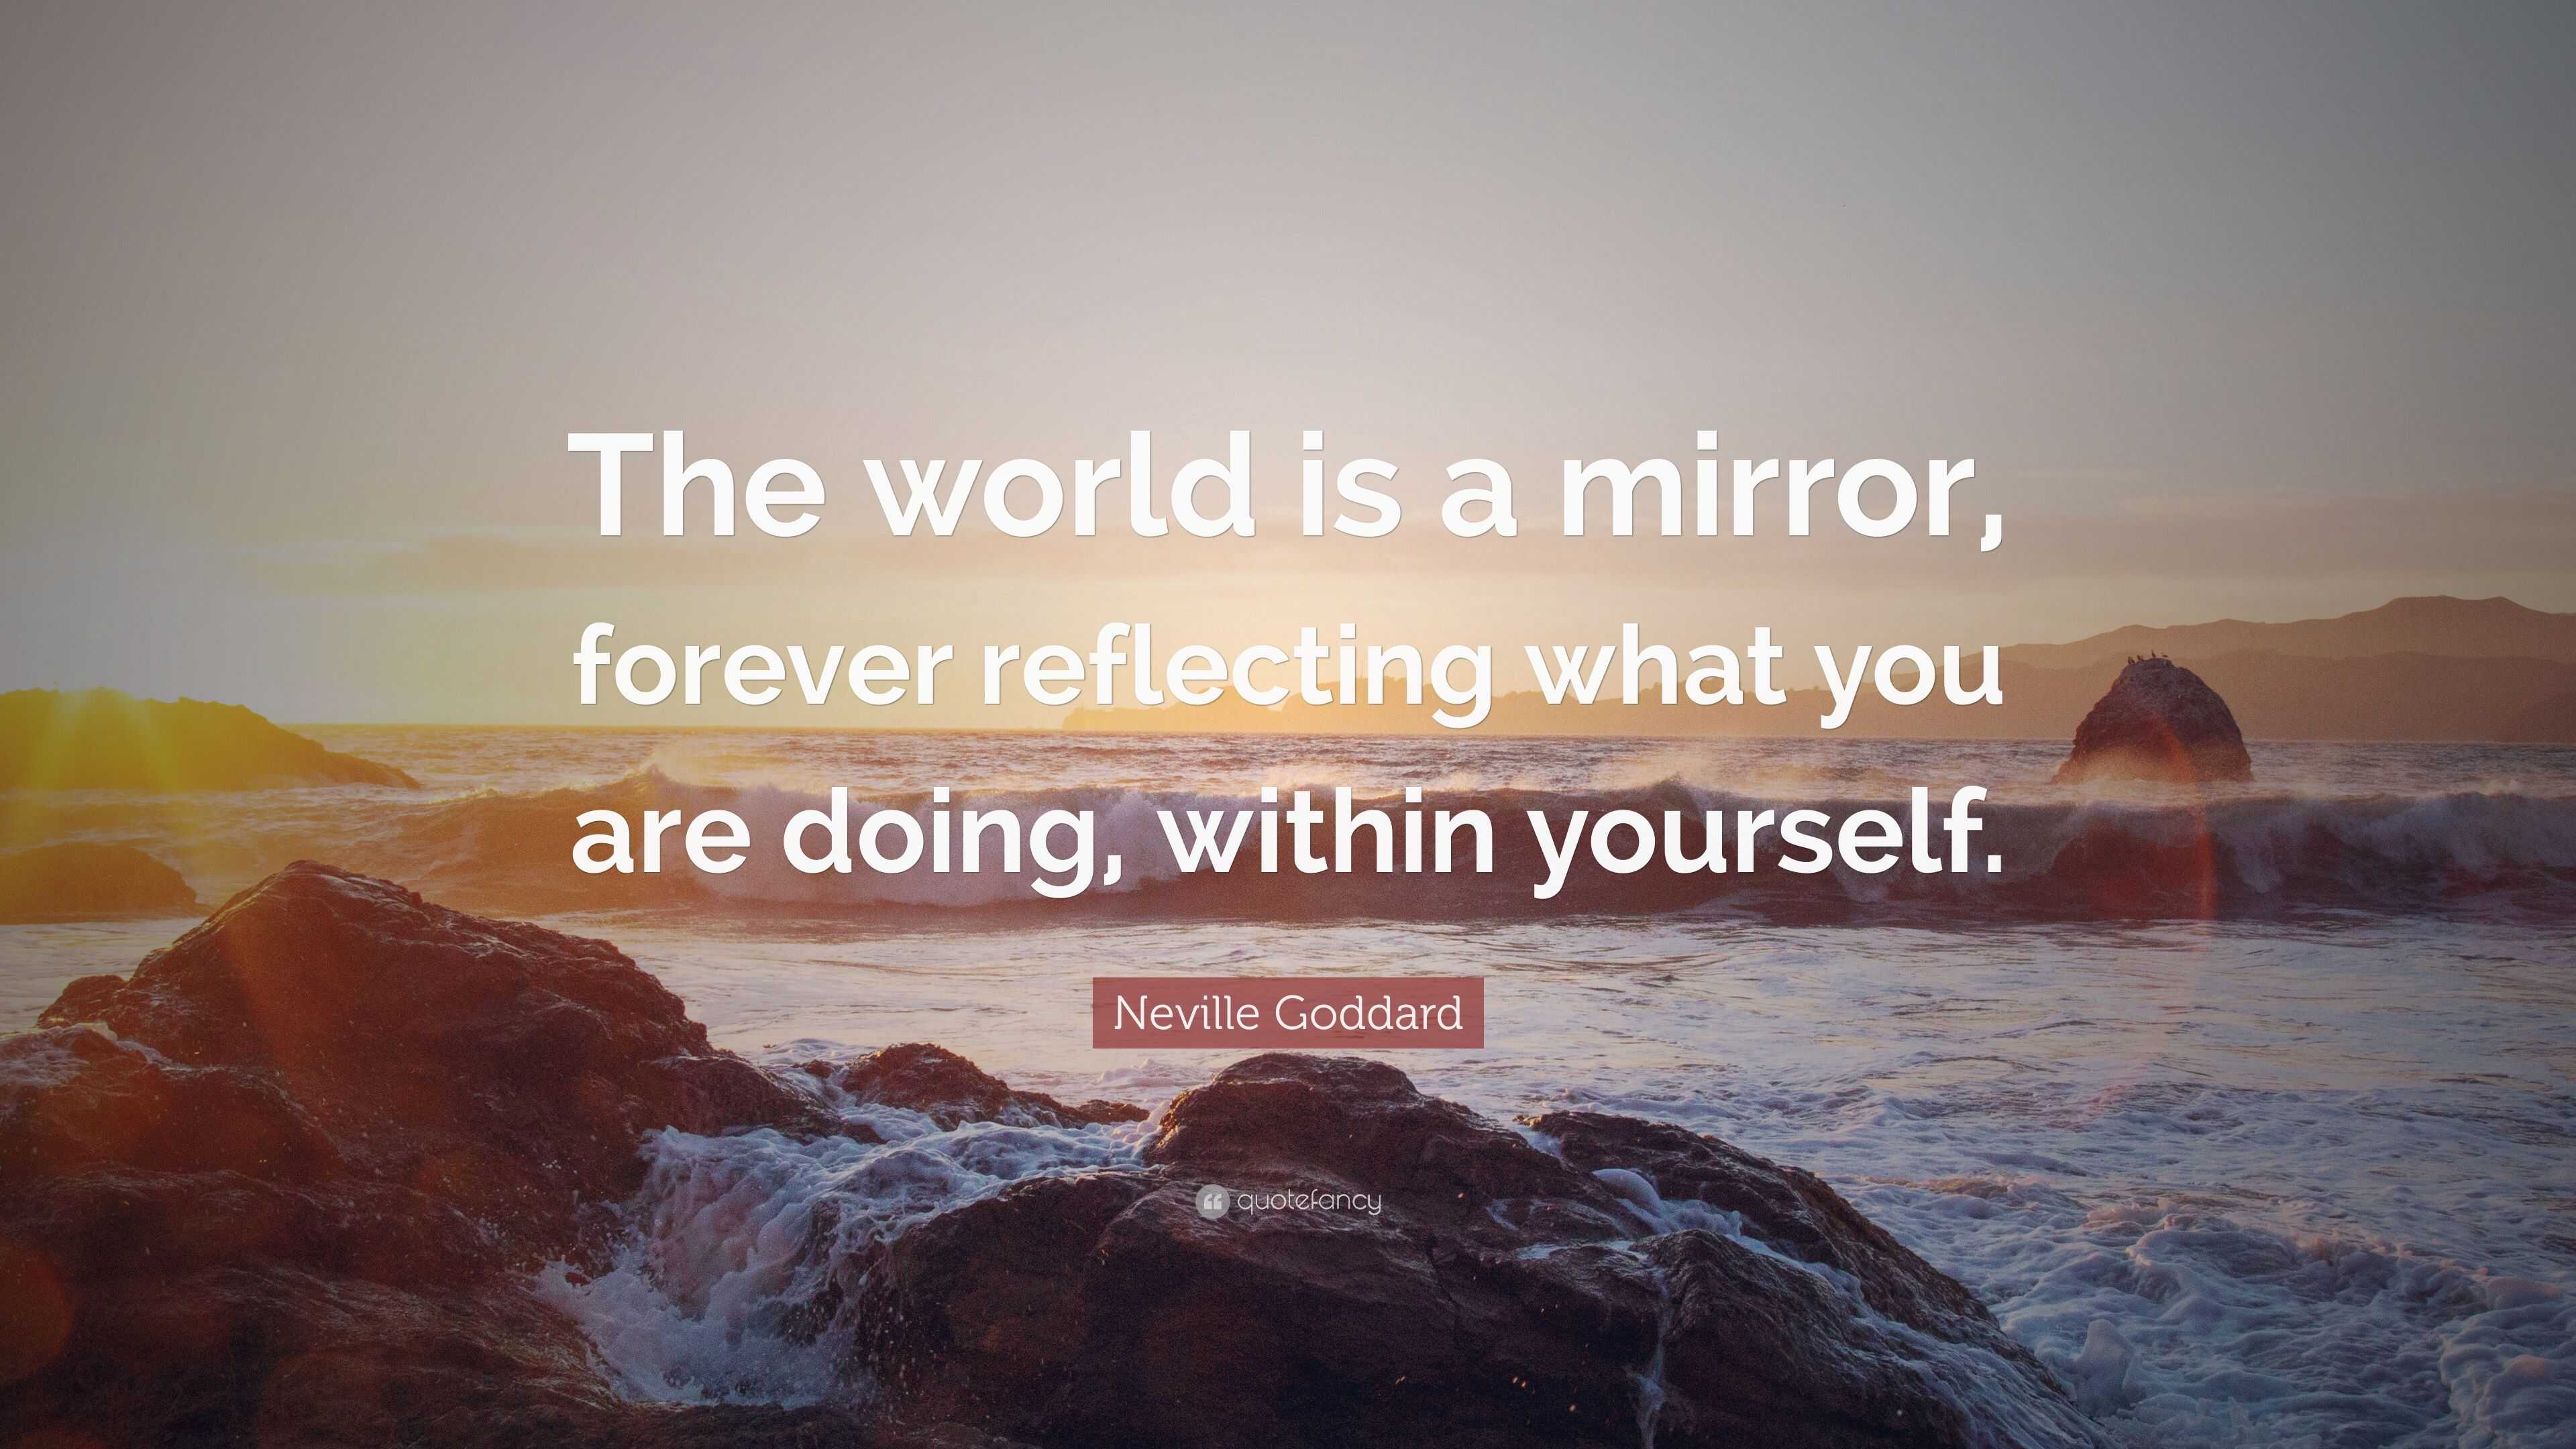 tips for dating “The world is a mirror, forever reflecting what you  are doing, within yourself.”